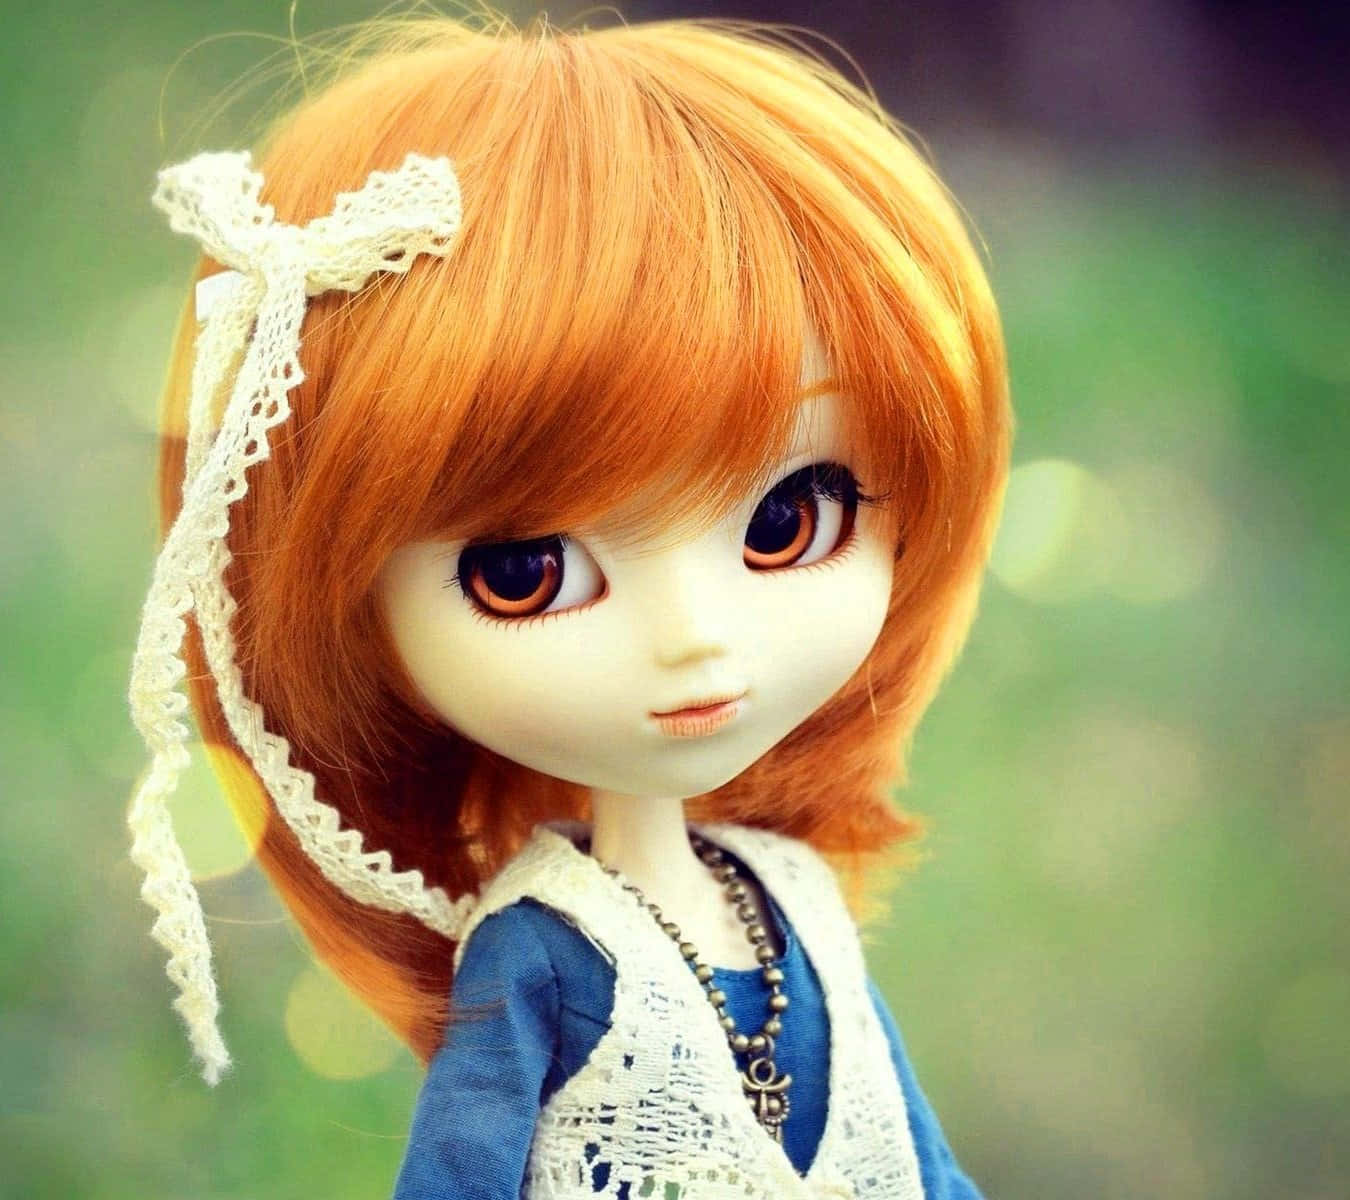 Download a doll with orange hair and a blue dress | Wallpapers.com